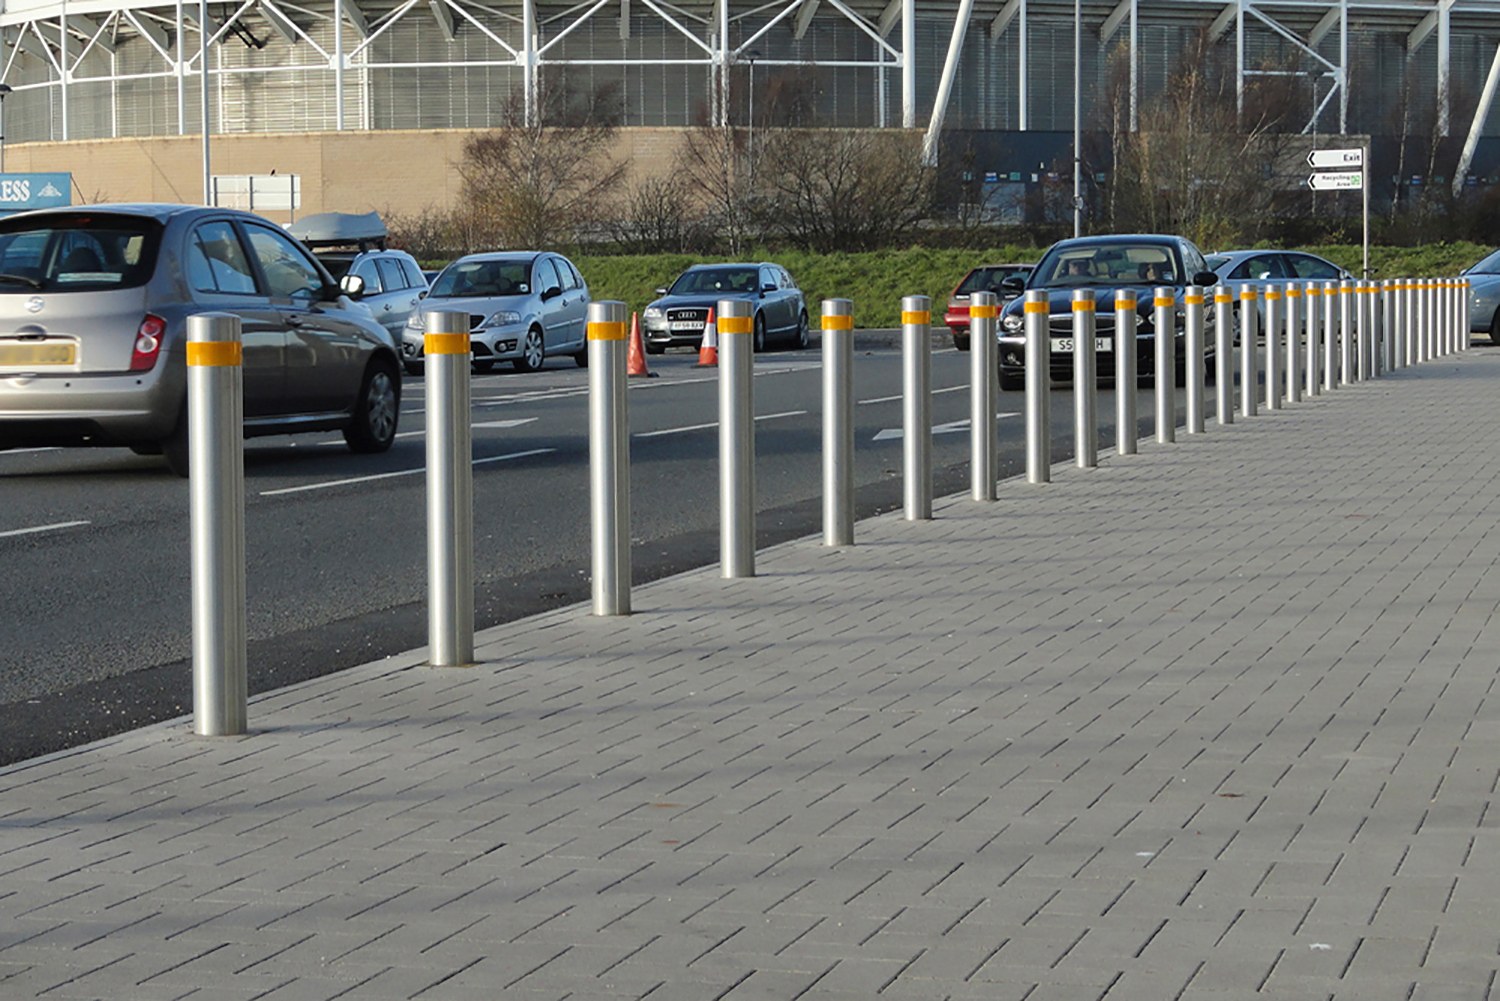 TYMETAL's carstopper 30 pas68 security bollard